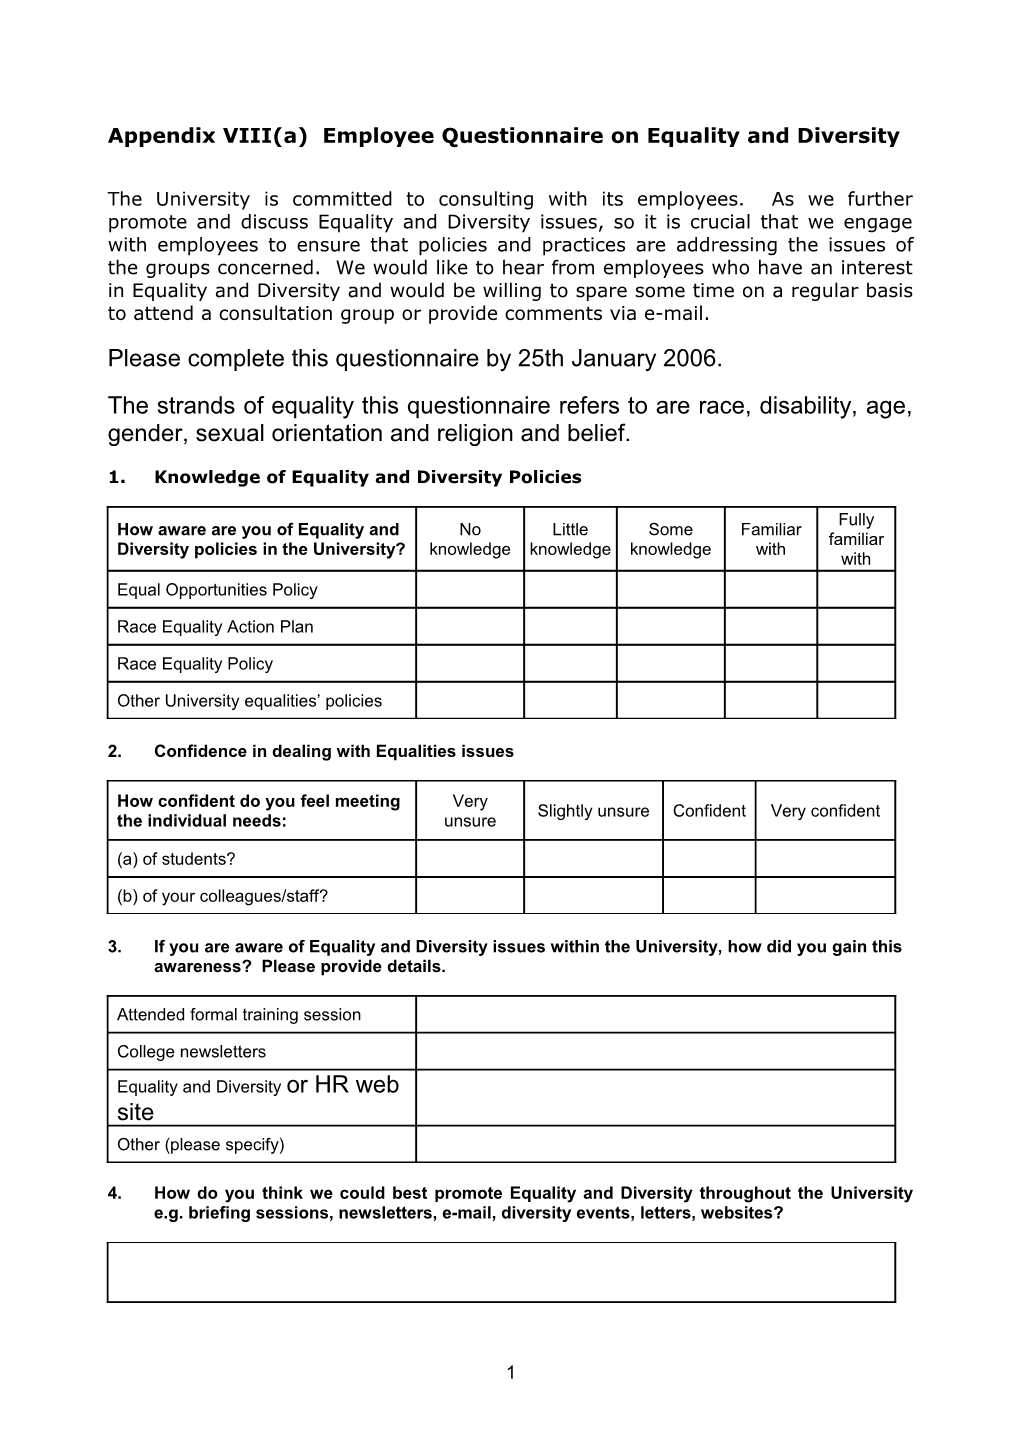 Appendix VIII(A) Employee Questionnaire on Equality and Diversity